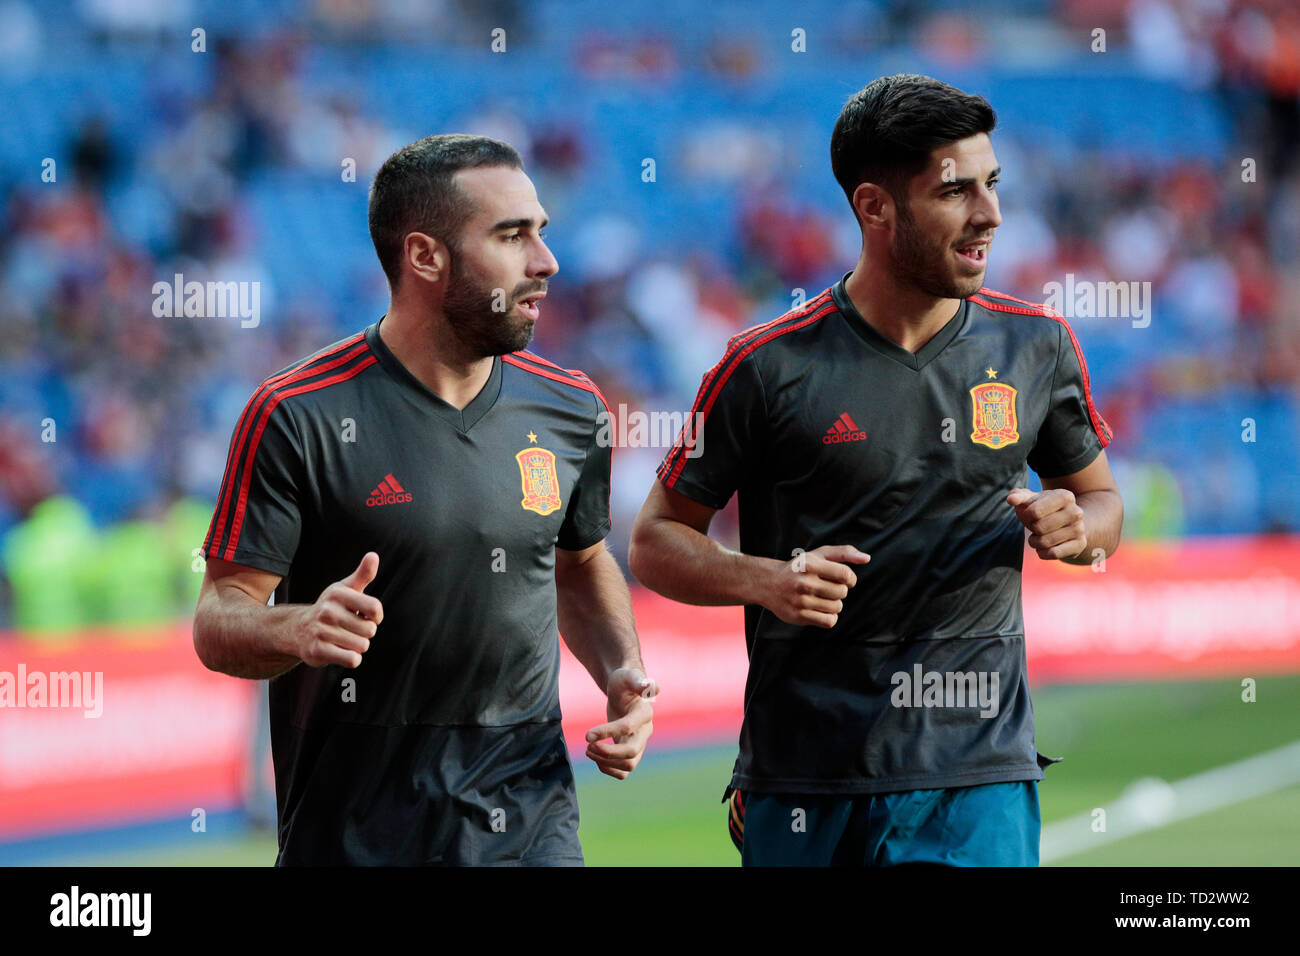 Spain national team player Dani Carvajal (L) and Marco Asensio (R) seen during the UEFA EURO 2020 Qualifier match between Spain and Sweden at Santiago Bernabeu Stadium in Madrid. Final score: Spain 3 - Sweden 0 Stock Photo